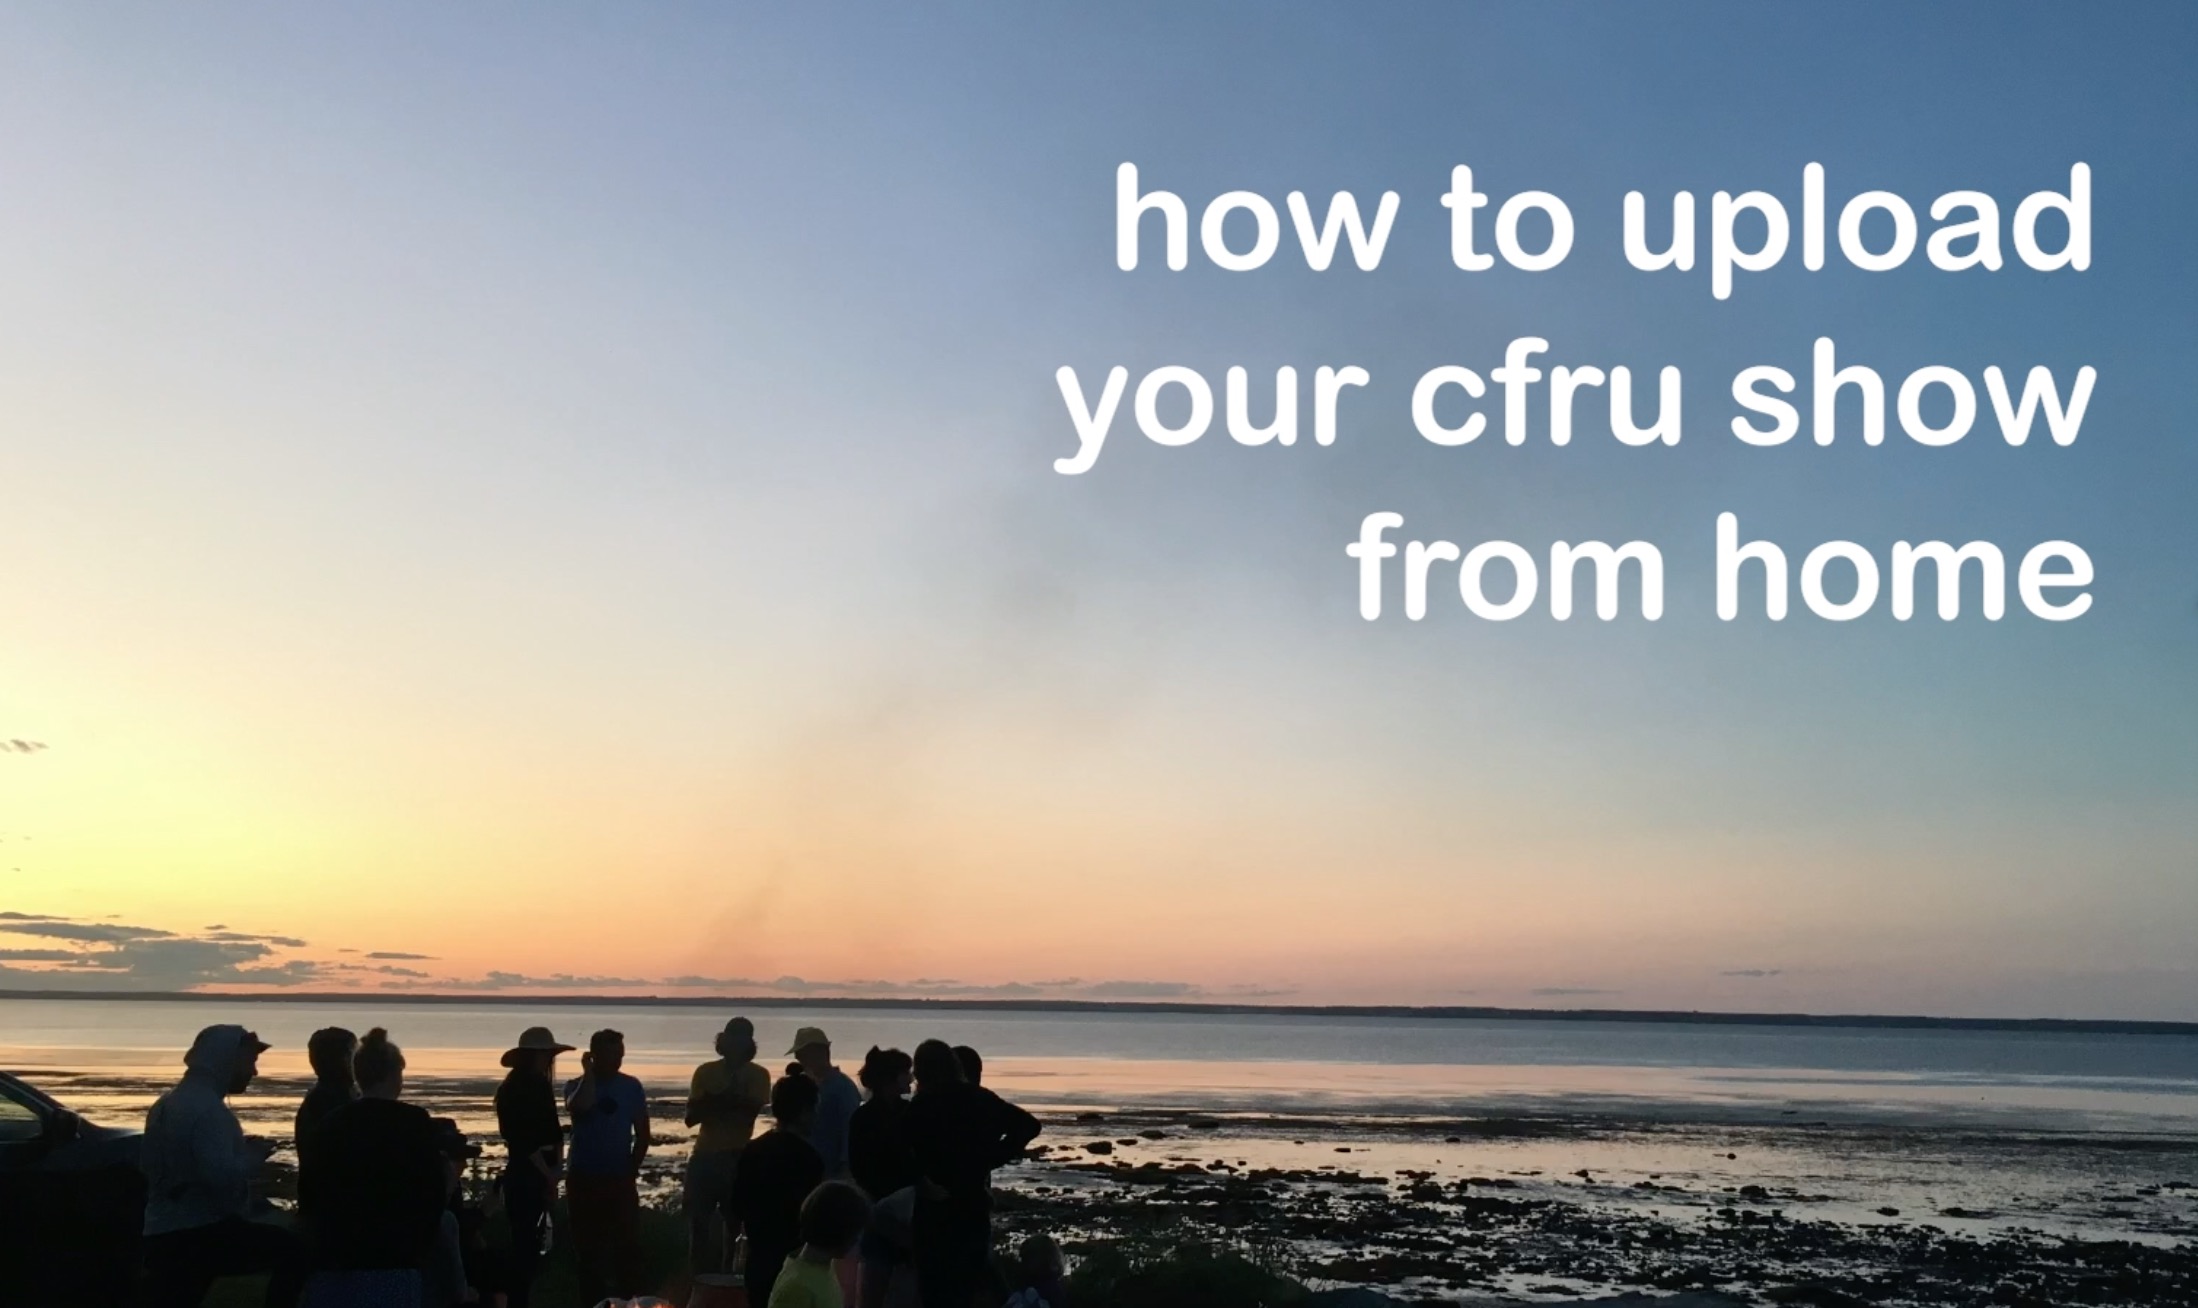 Learn how to upload your CFRU show from home.